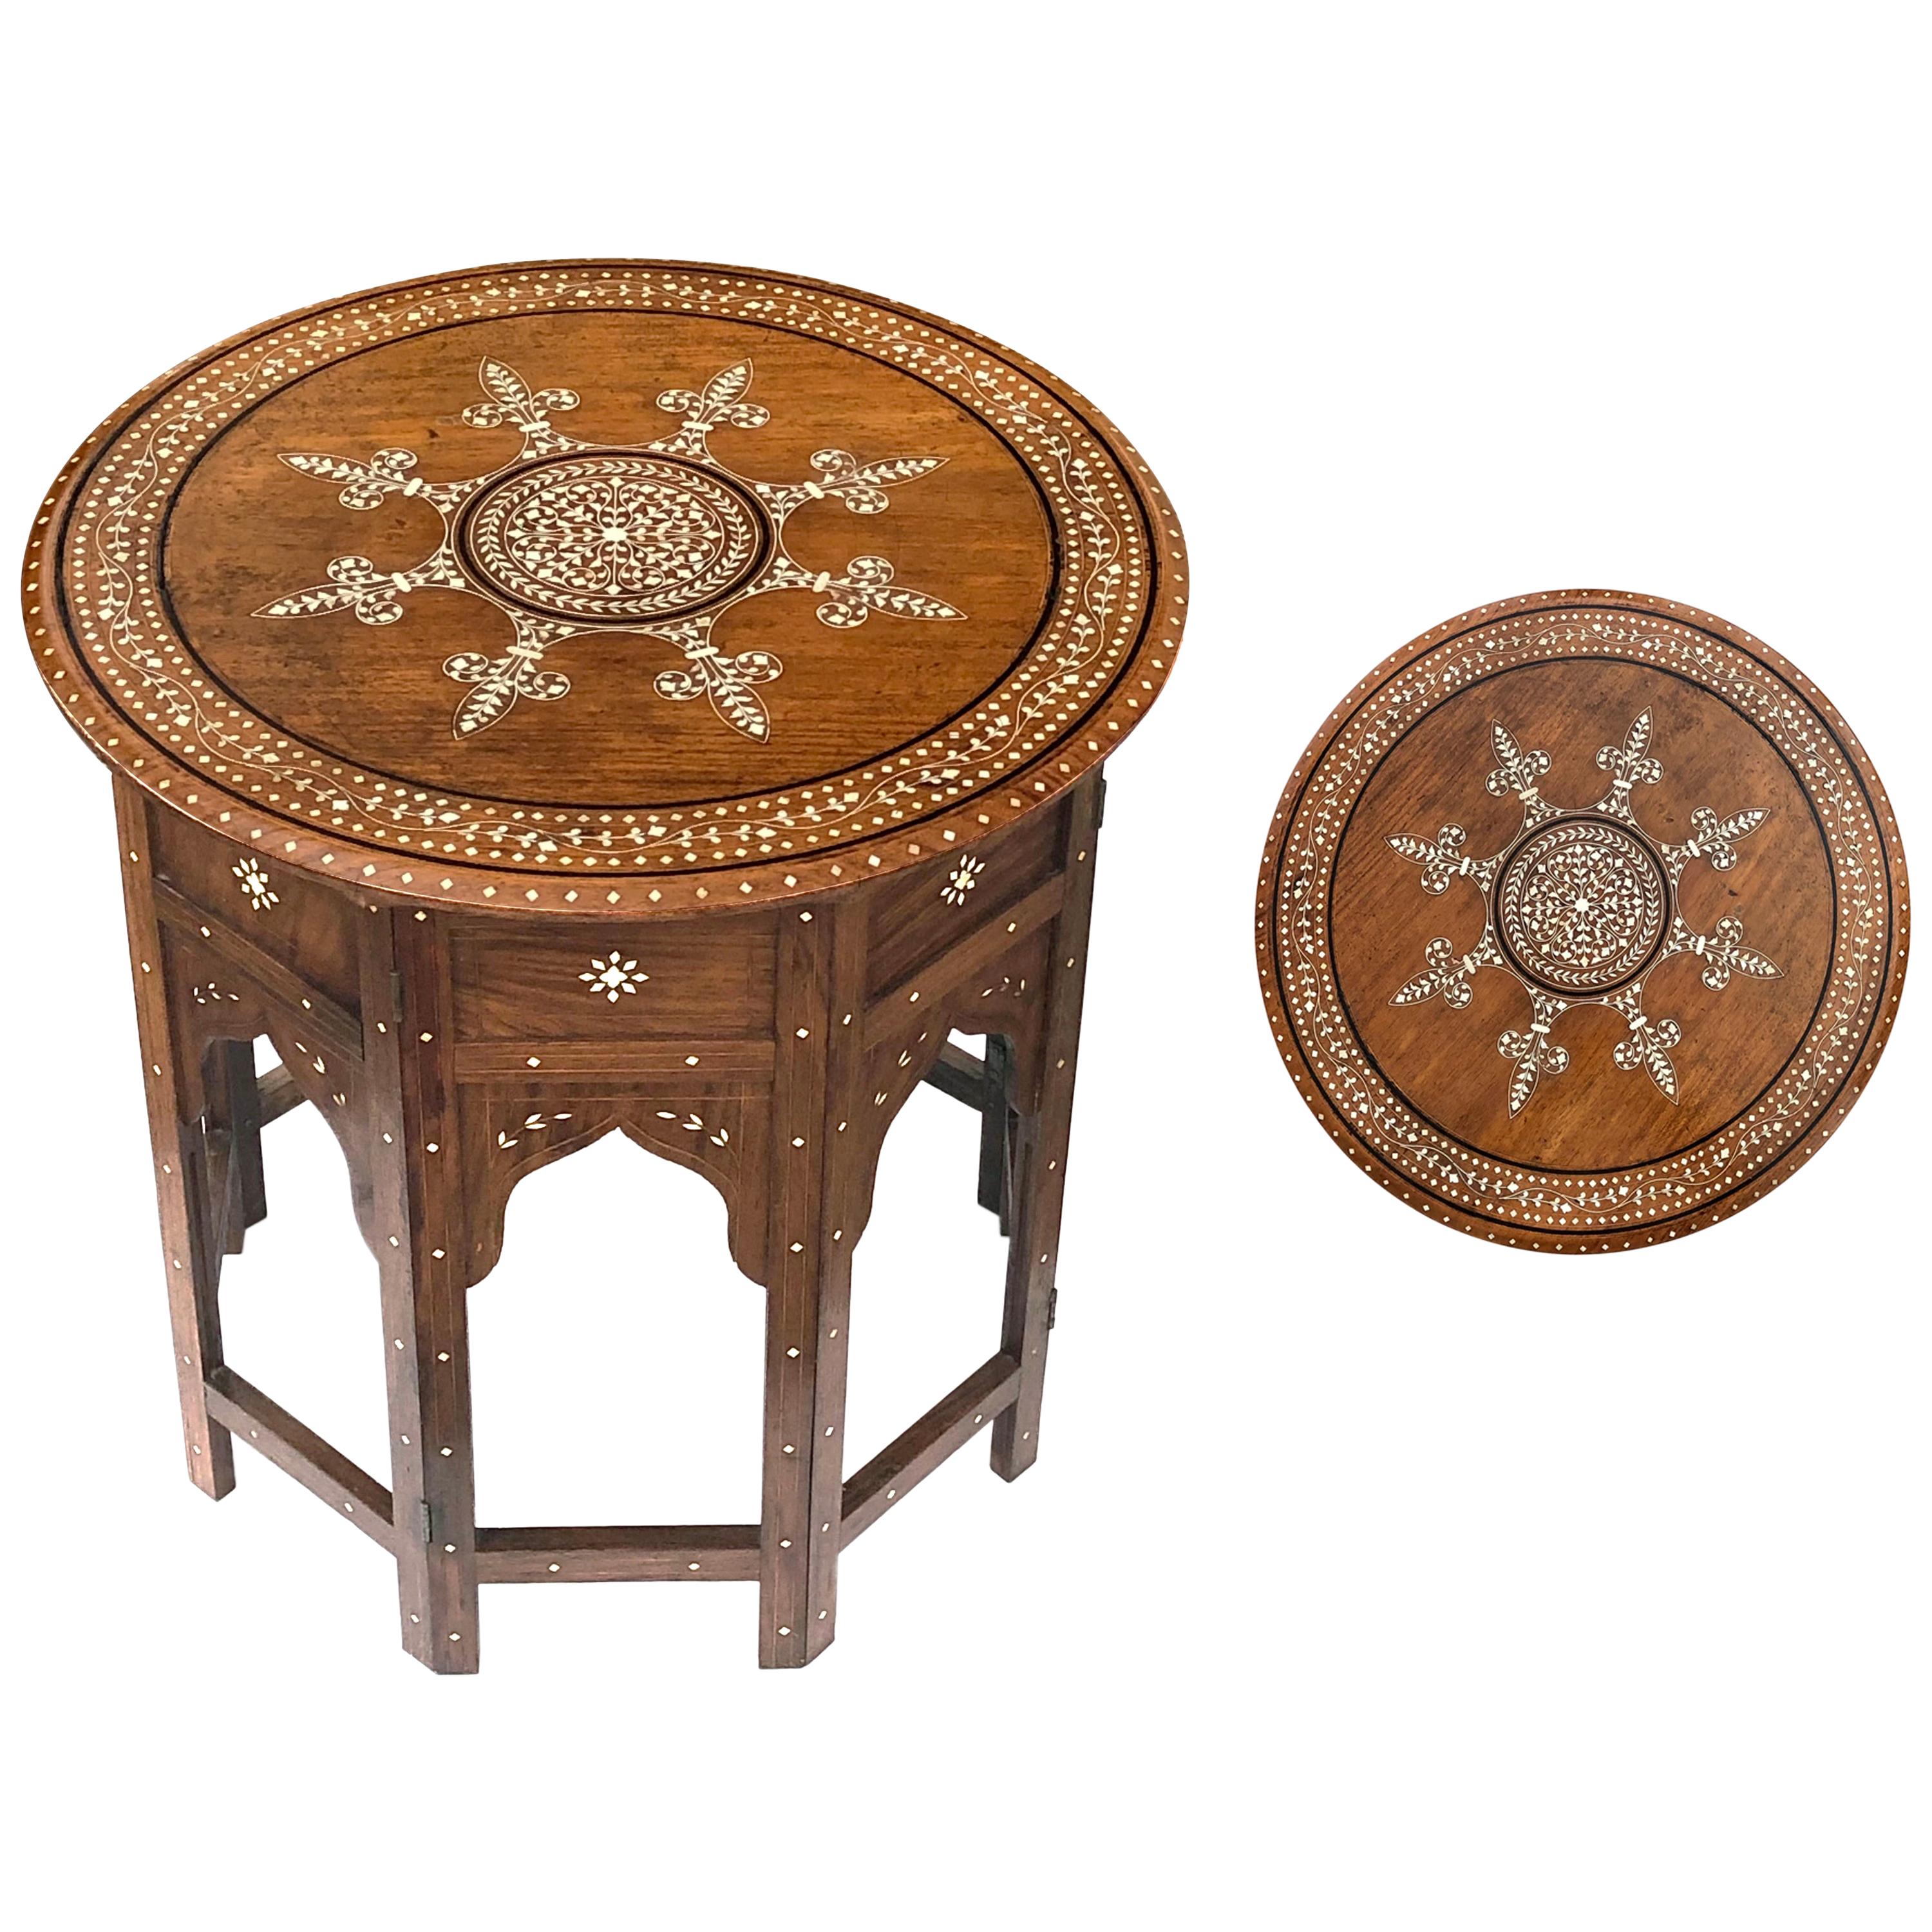 Intricately Inlaid Anglo Indian Circular Traveling Table